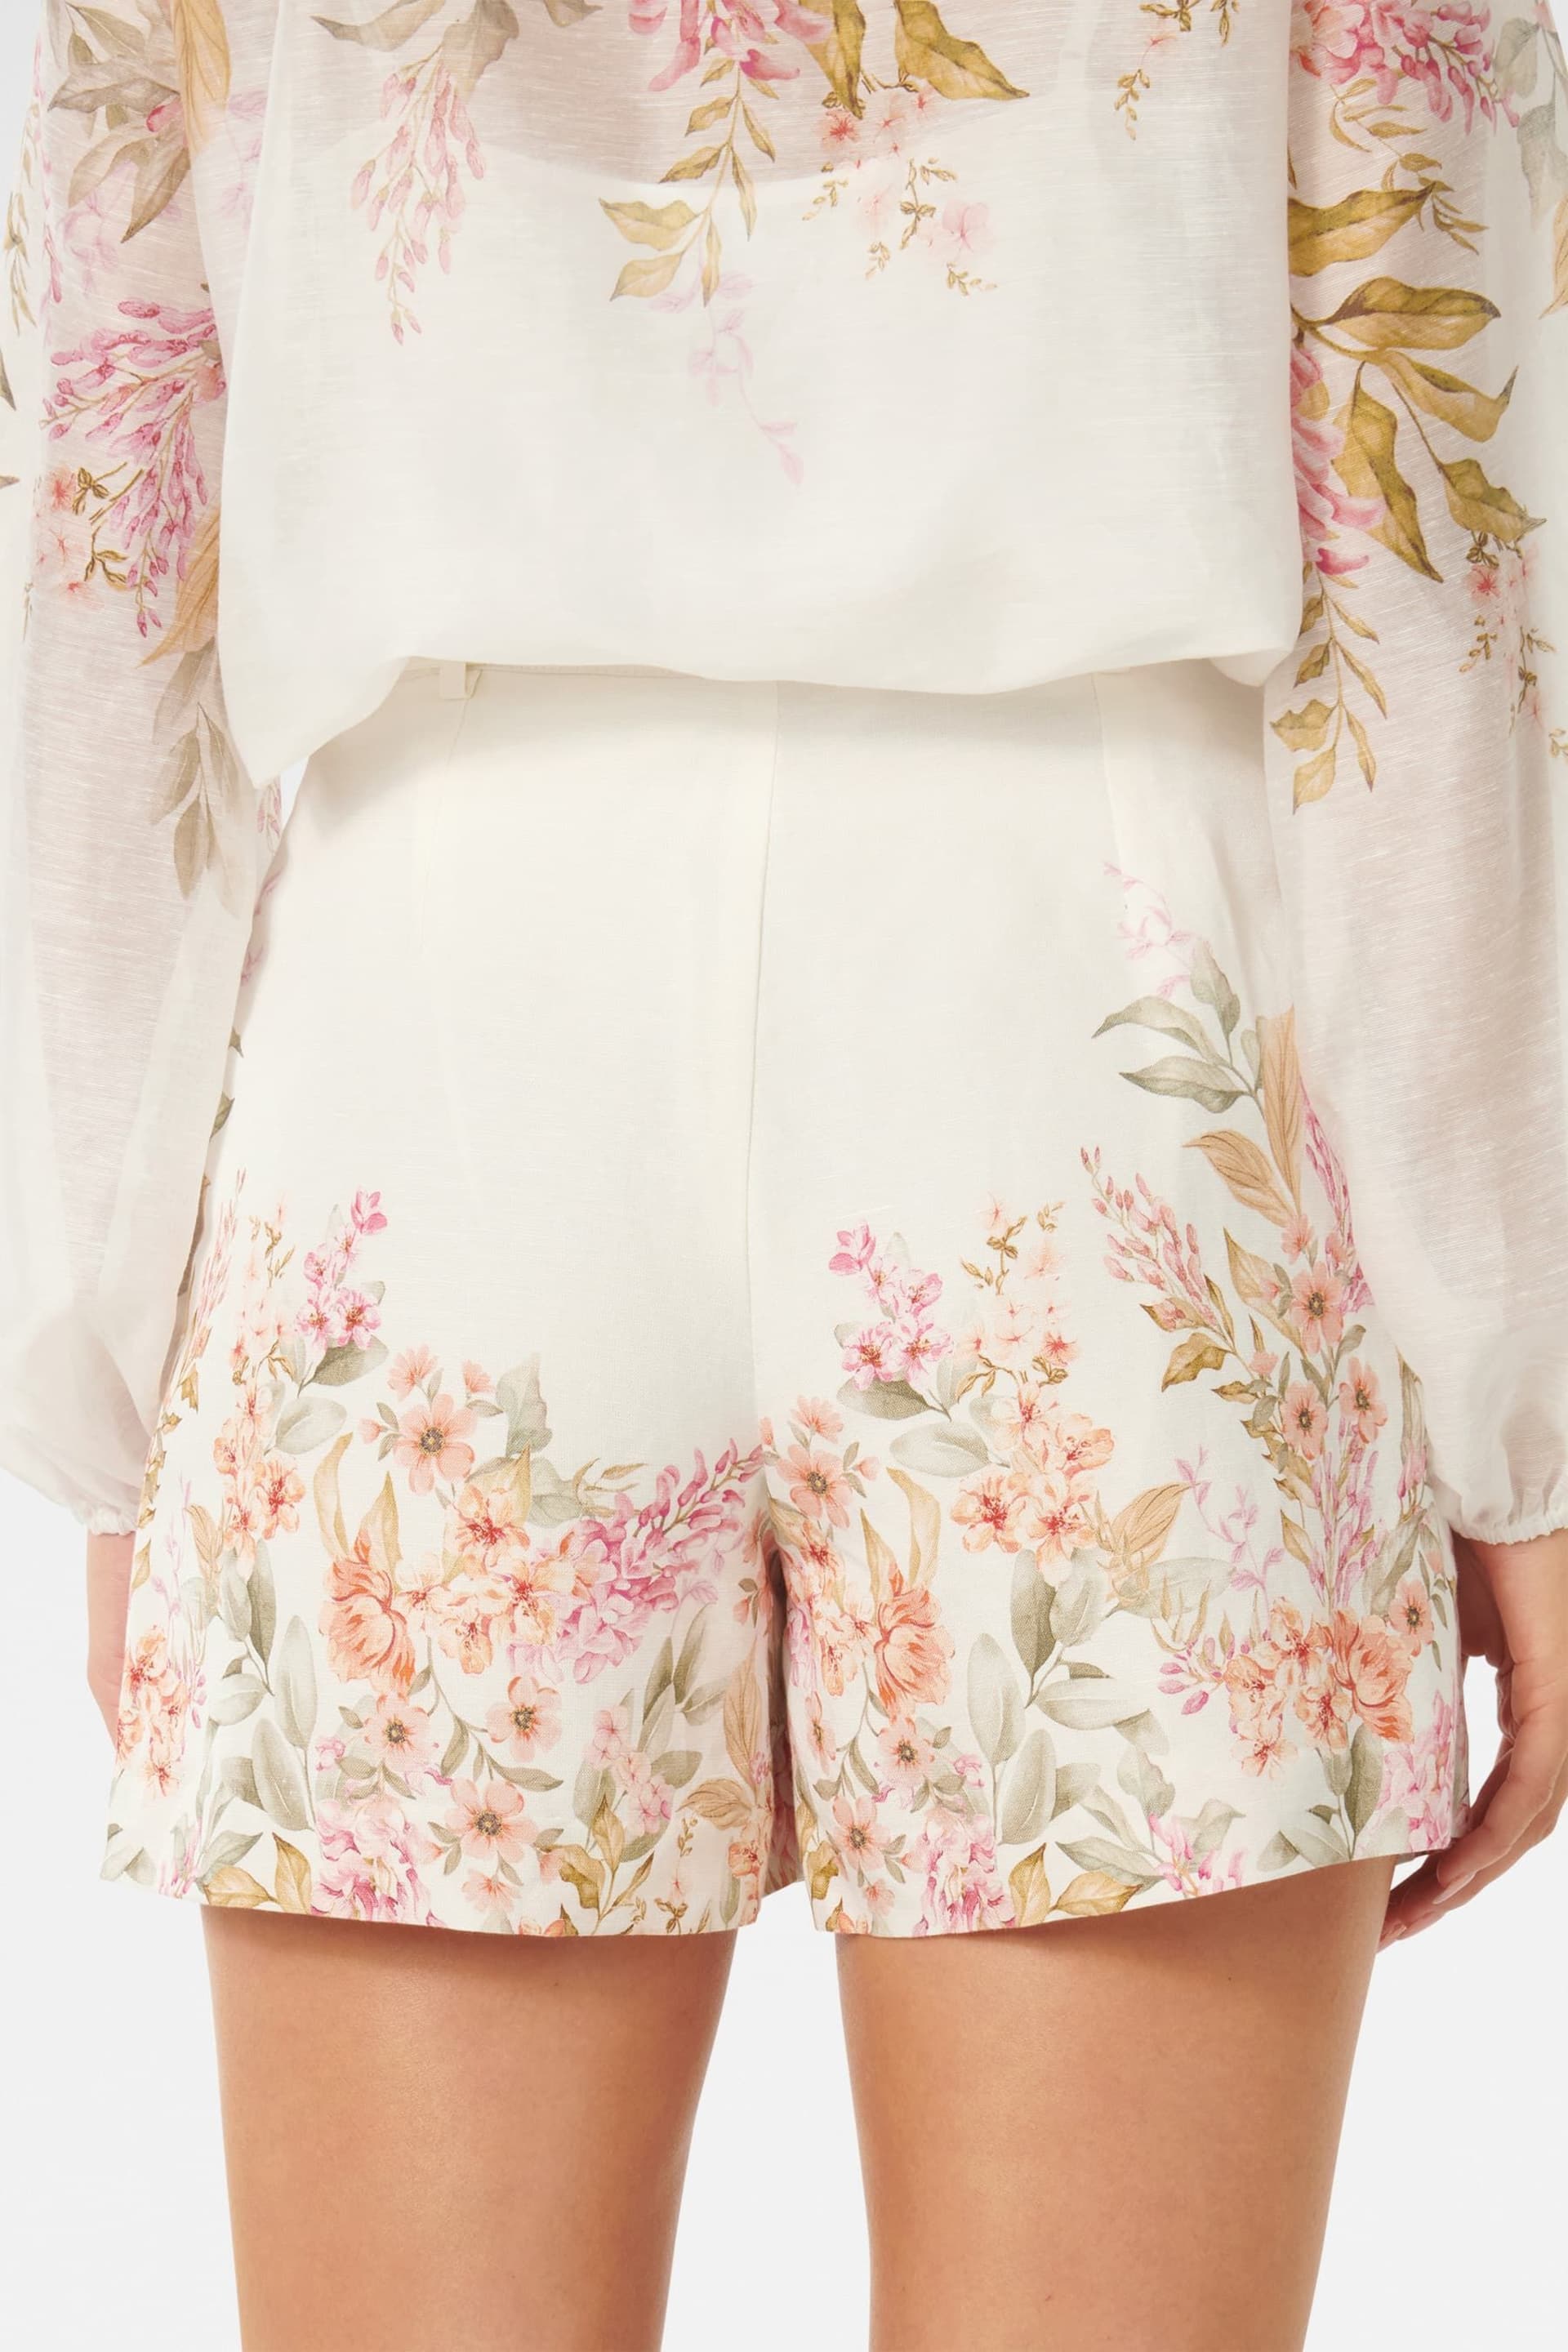 Forever New Cream Kiara Belted Shorts With A Touch Of Linen - Image 4 of 5